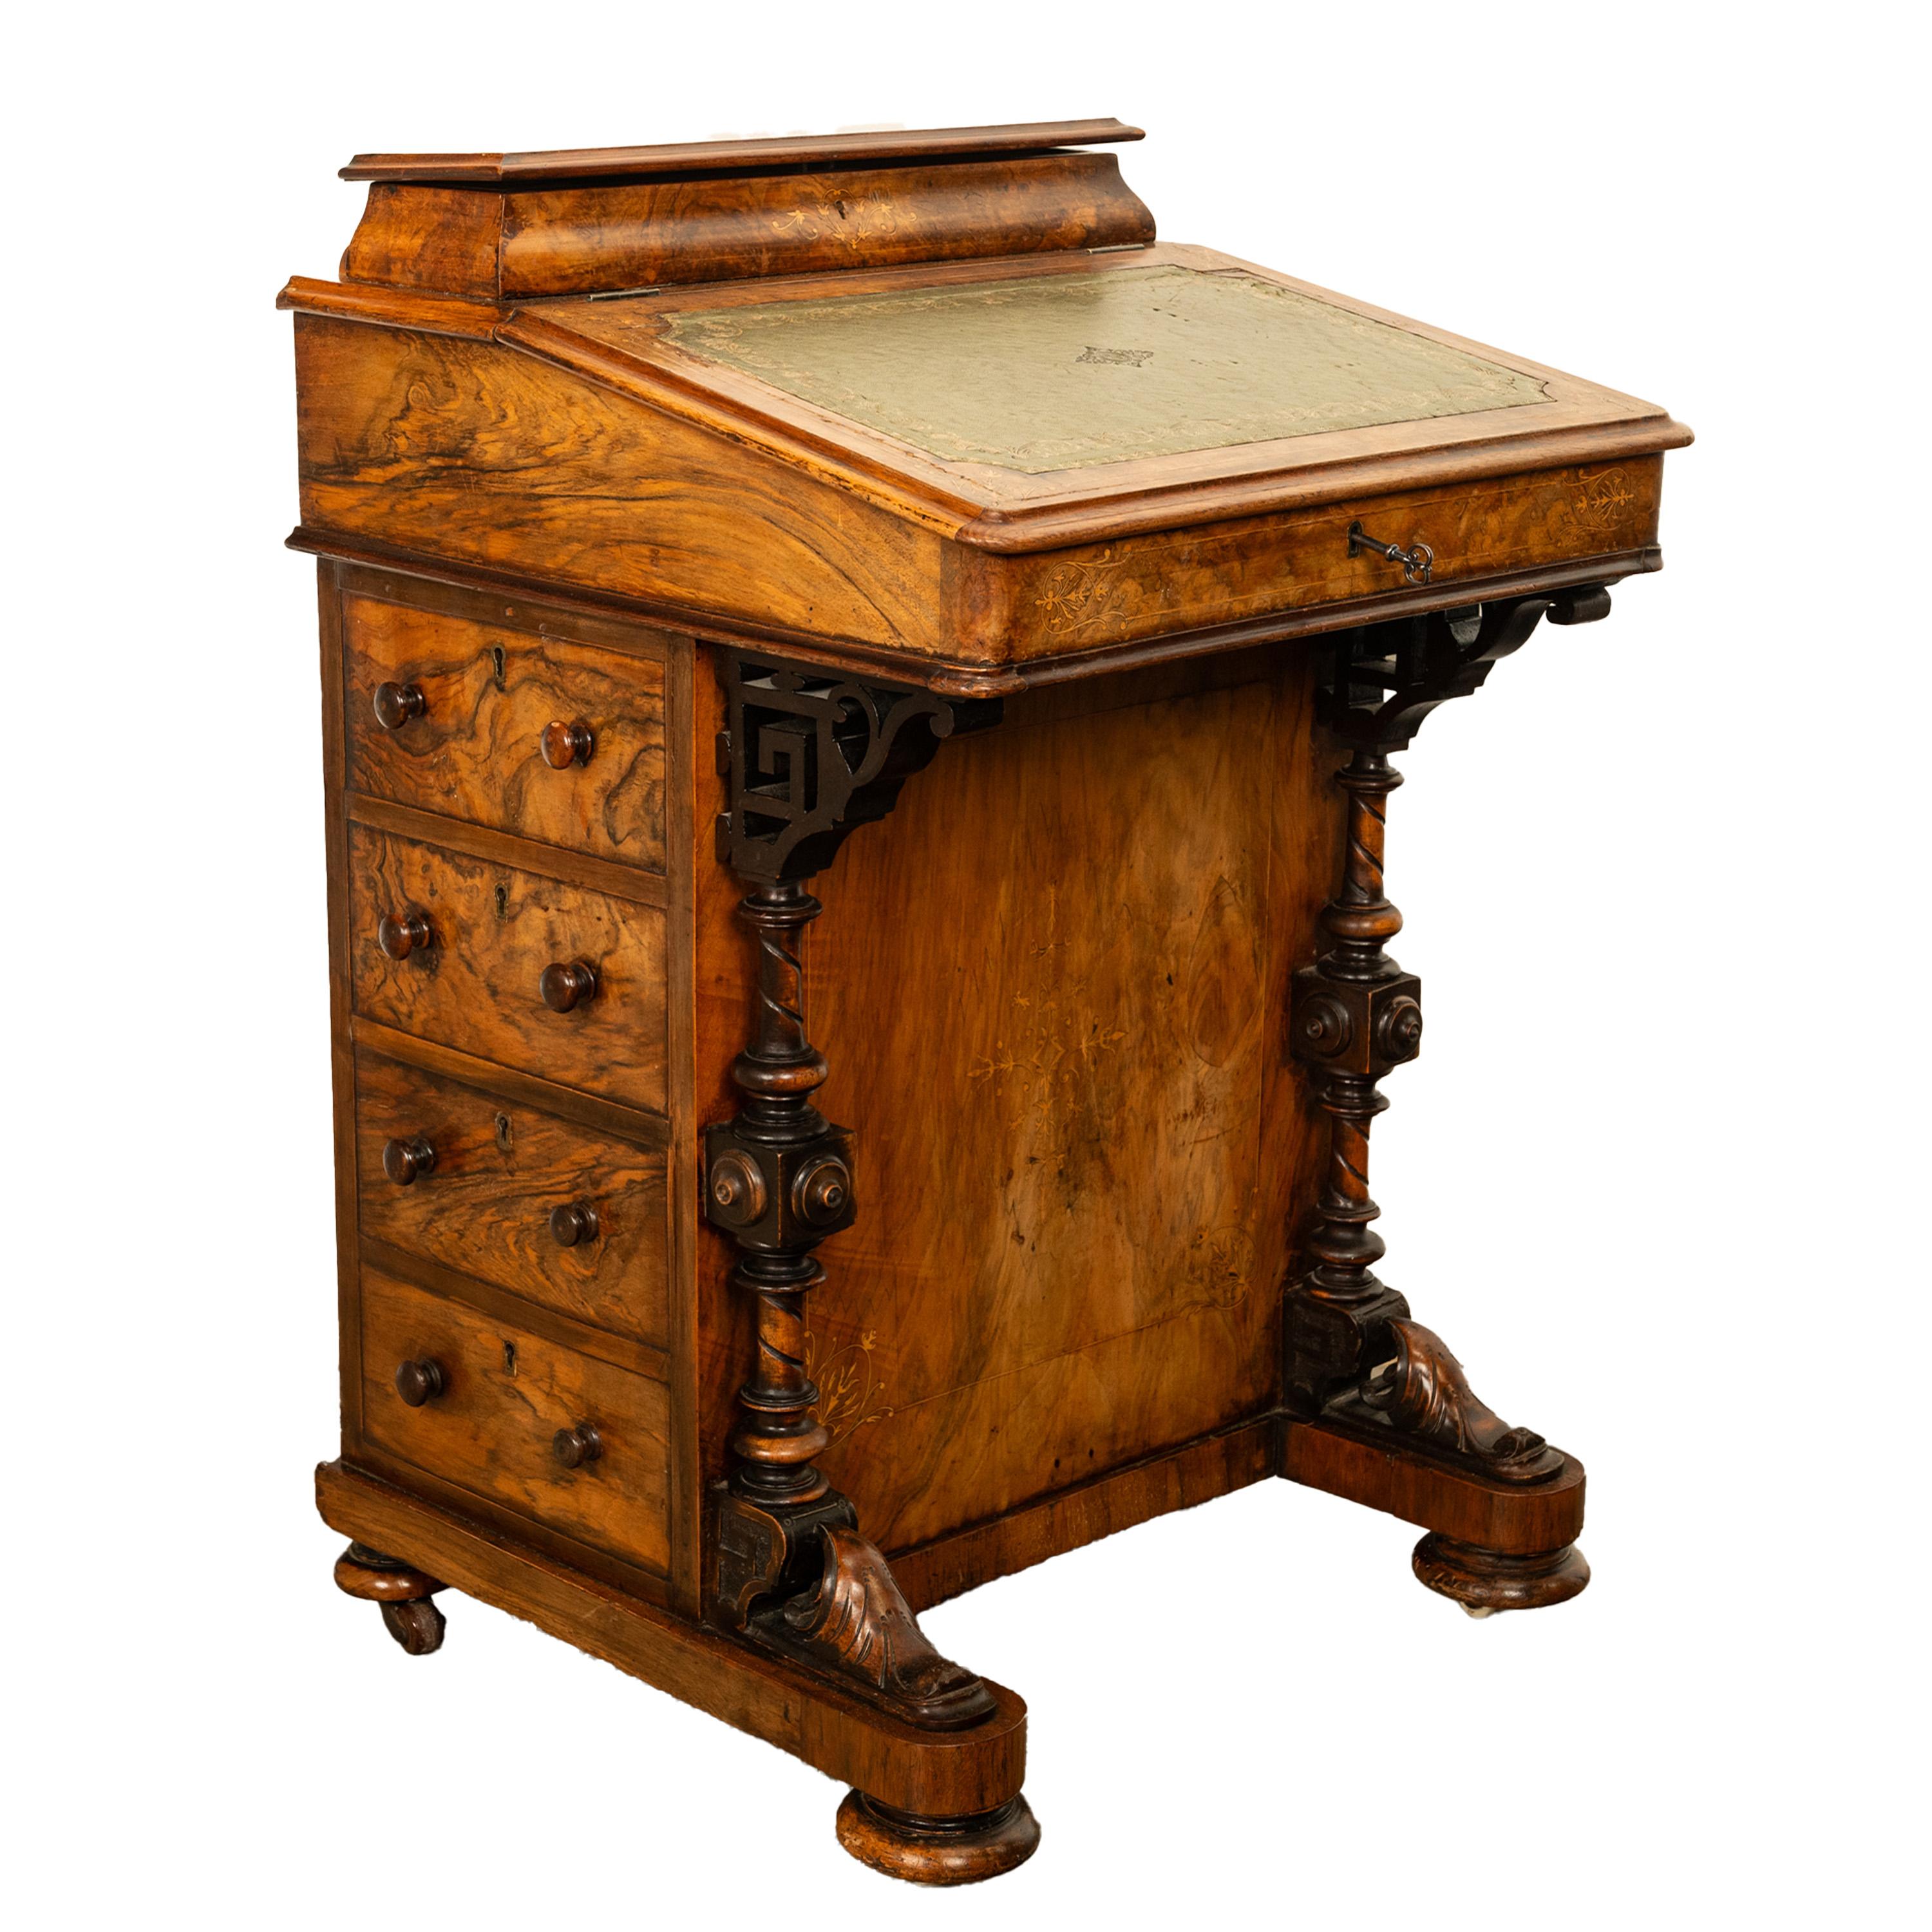 A fine antique burl walnut & inlaid marquetry Davenport desk, circa 1860.
The davenport is made from the finest figured burl walnut, to the top is a lift up lid with a fitted interior for pens and other writing materials.
Below is a lift up